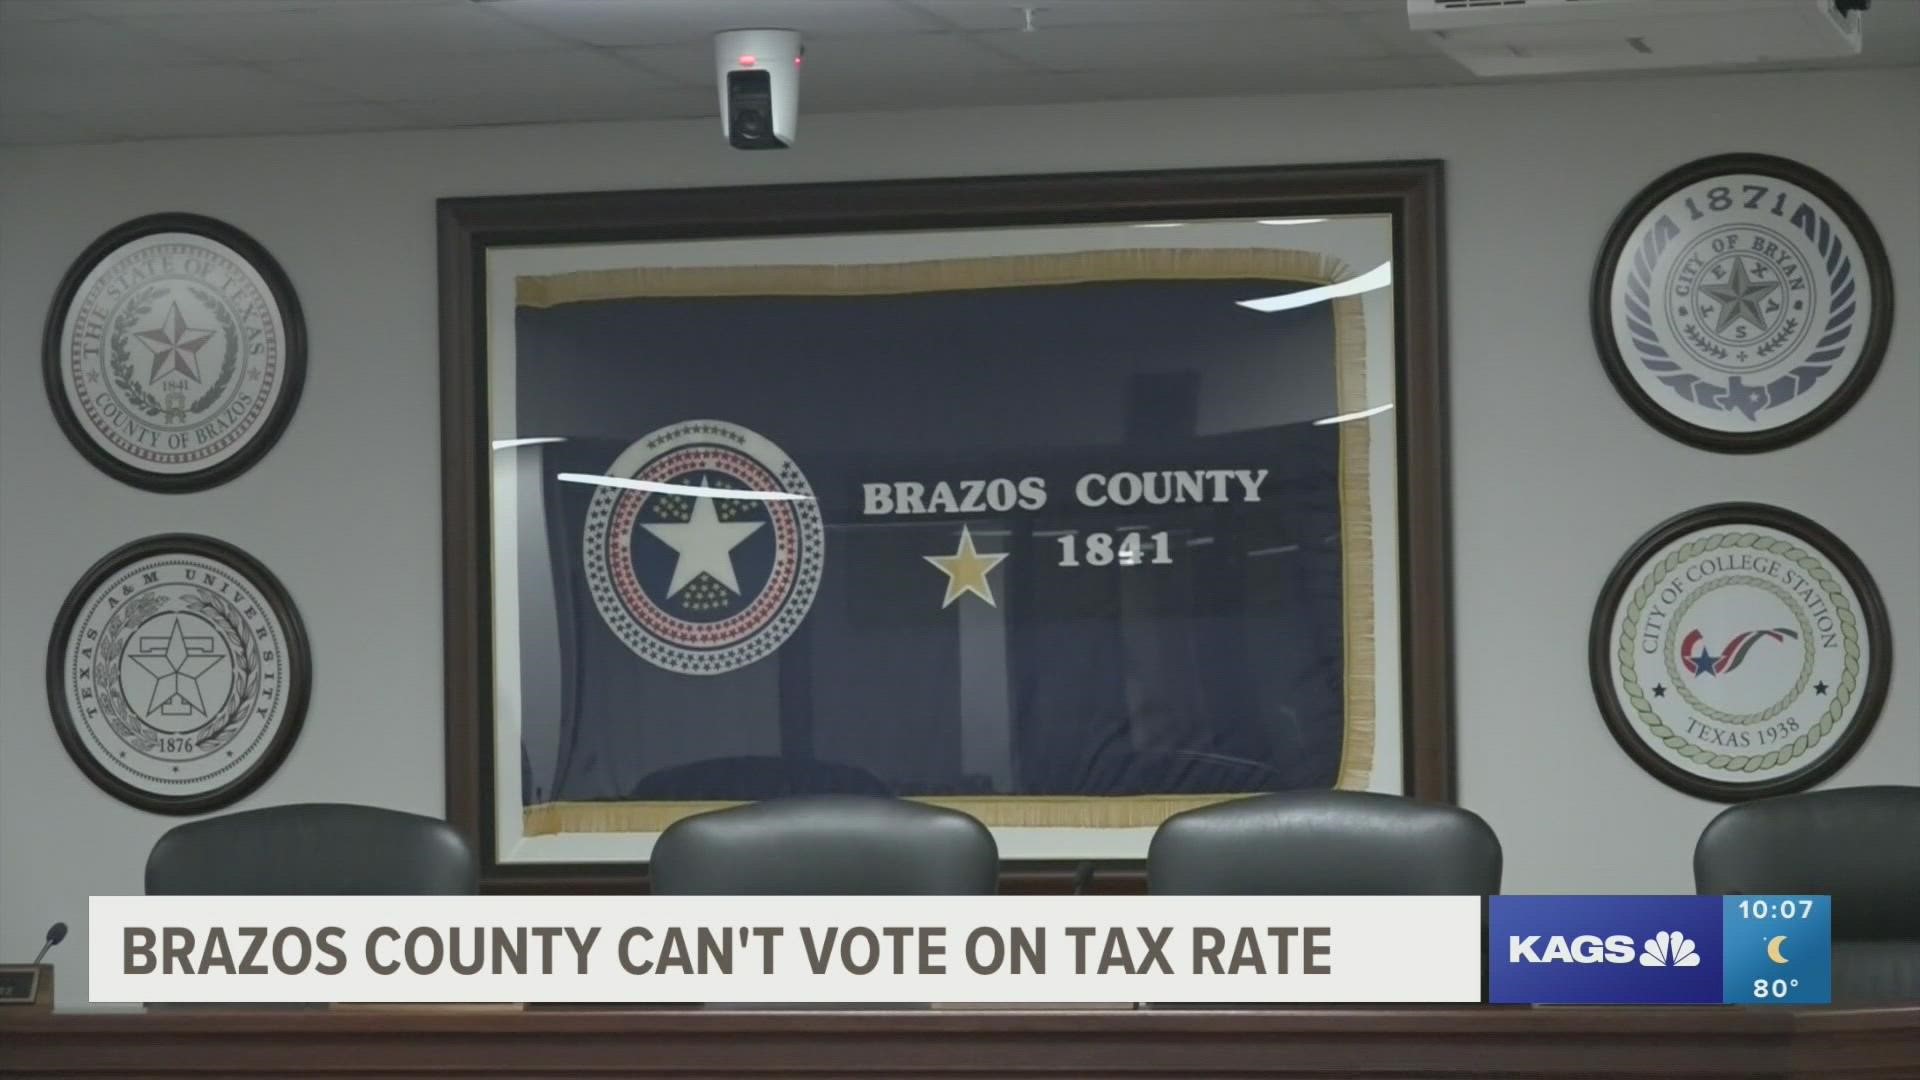 For two weeks now the Brazos county commissioners court was on unable to vote on a tax rate.